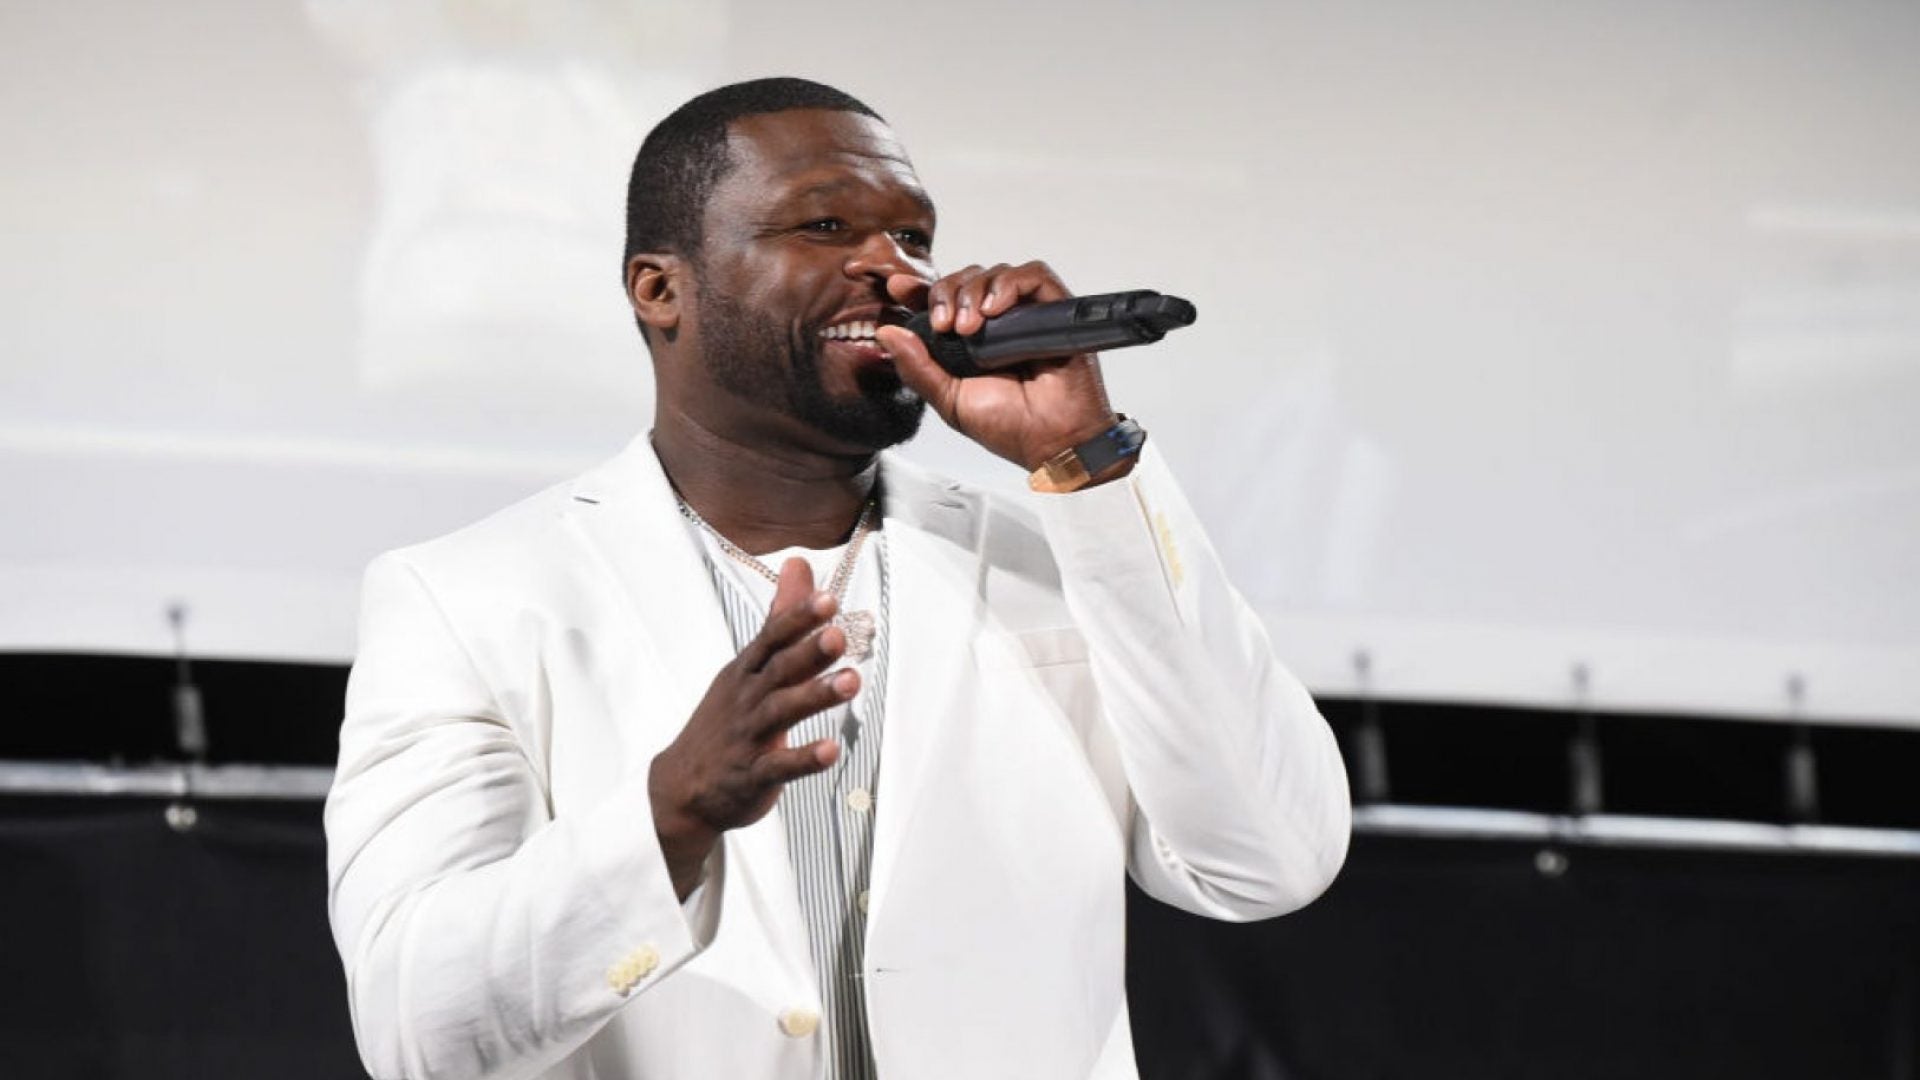 50 Cent On Why Black Artists Being Awarded Matters: 'Your Legacy Won't Reflect What You've Actually Done'